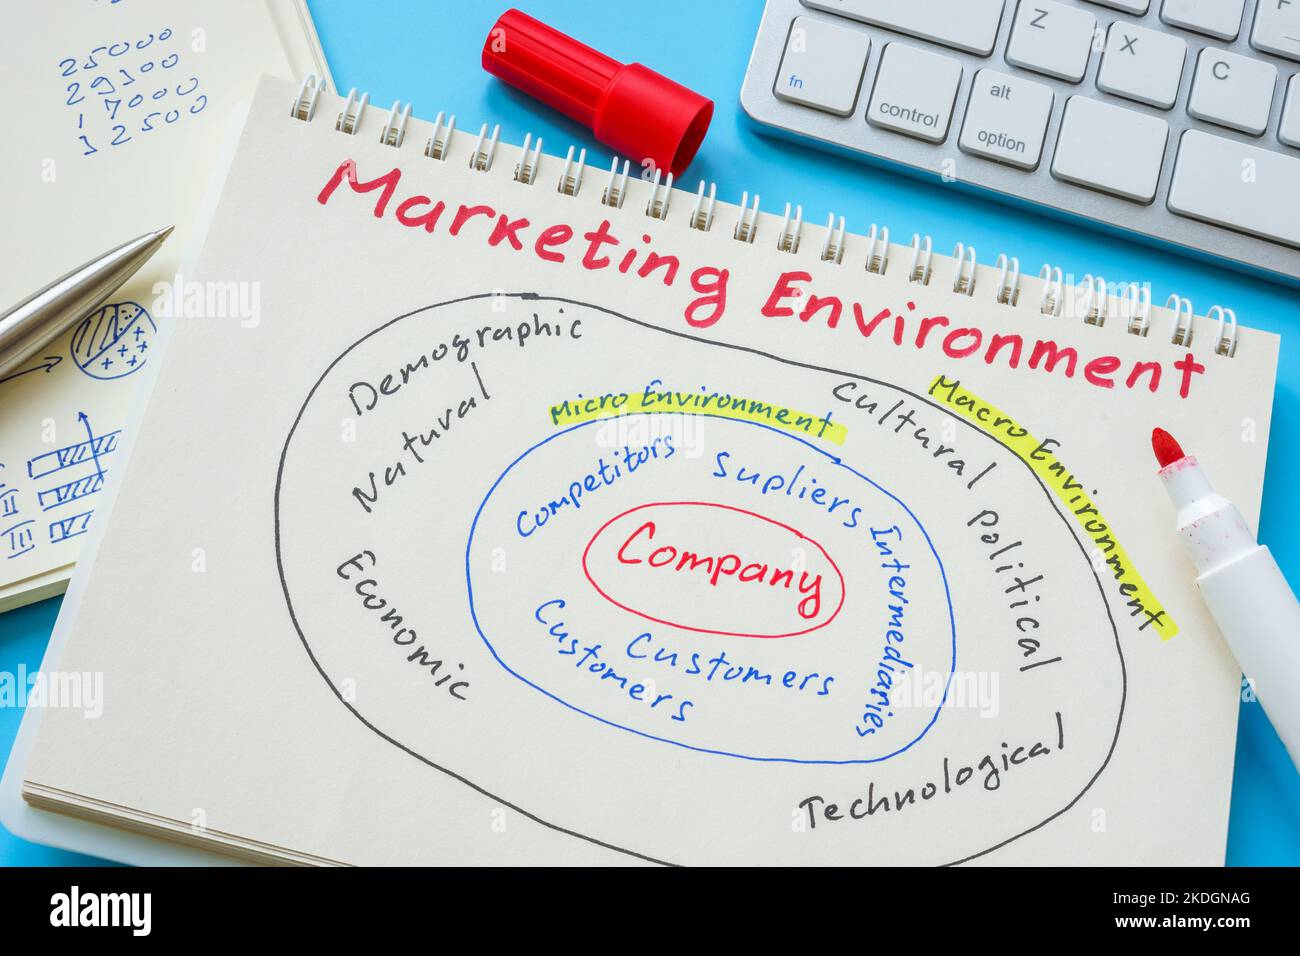 Chart about marketing environment in the open notepad. Stock Photo